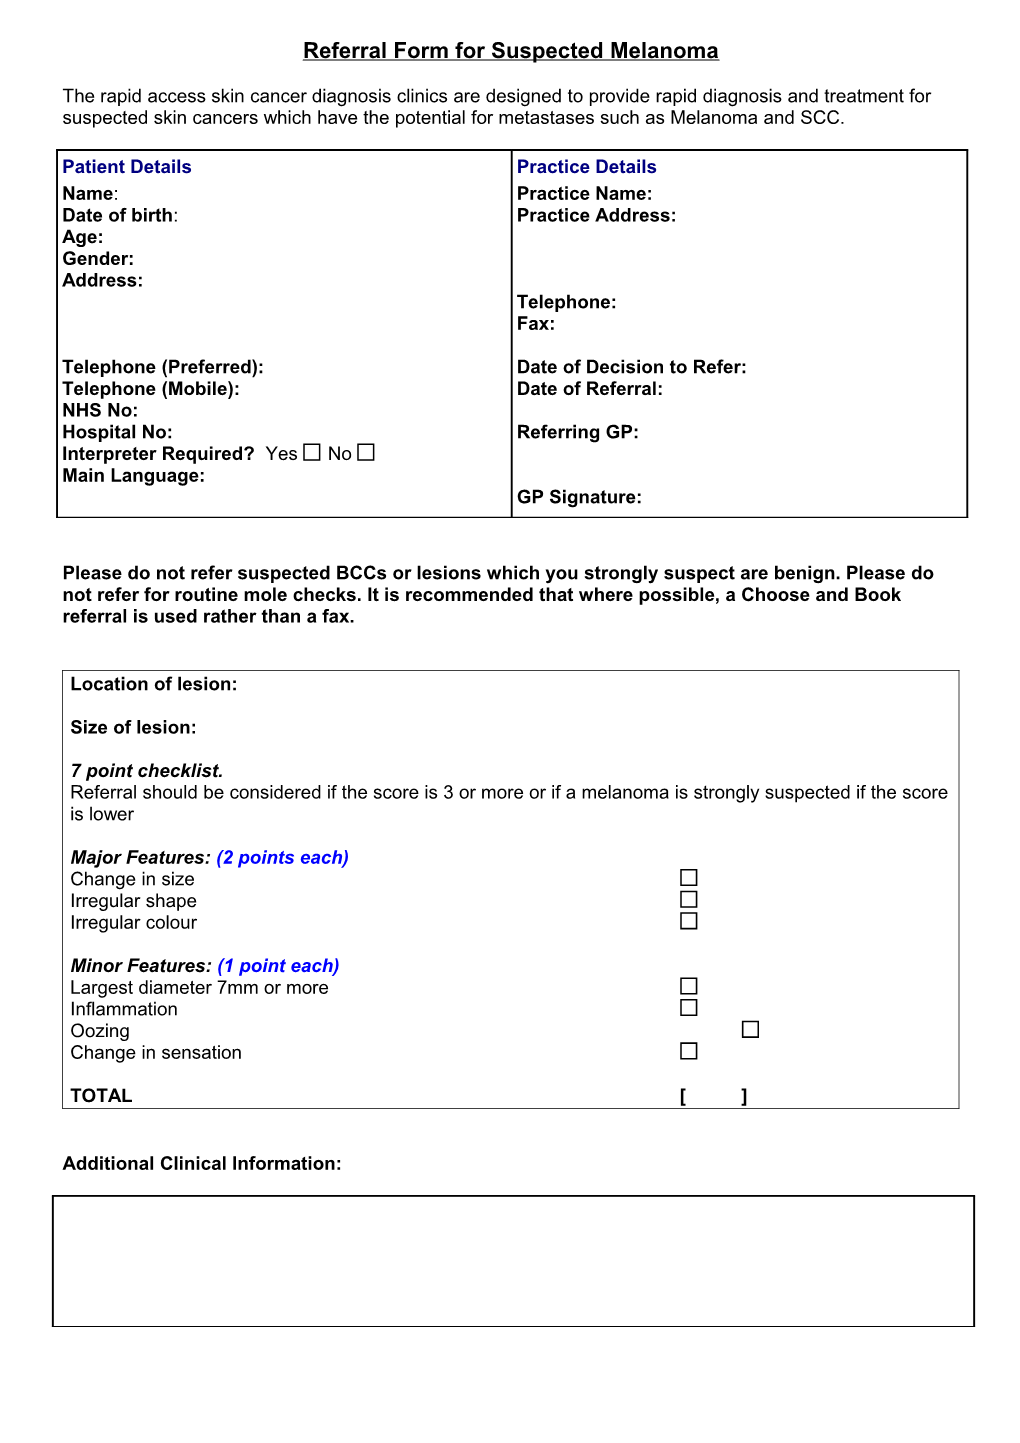 Referral Form for Suspected Melanoma